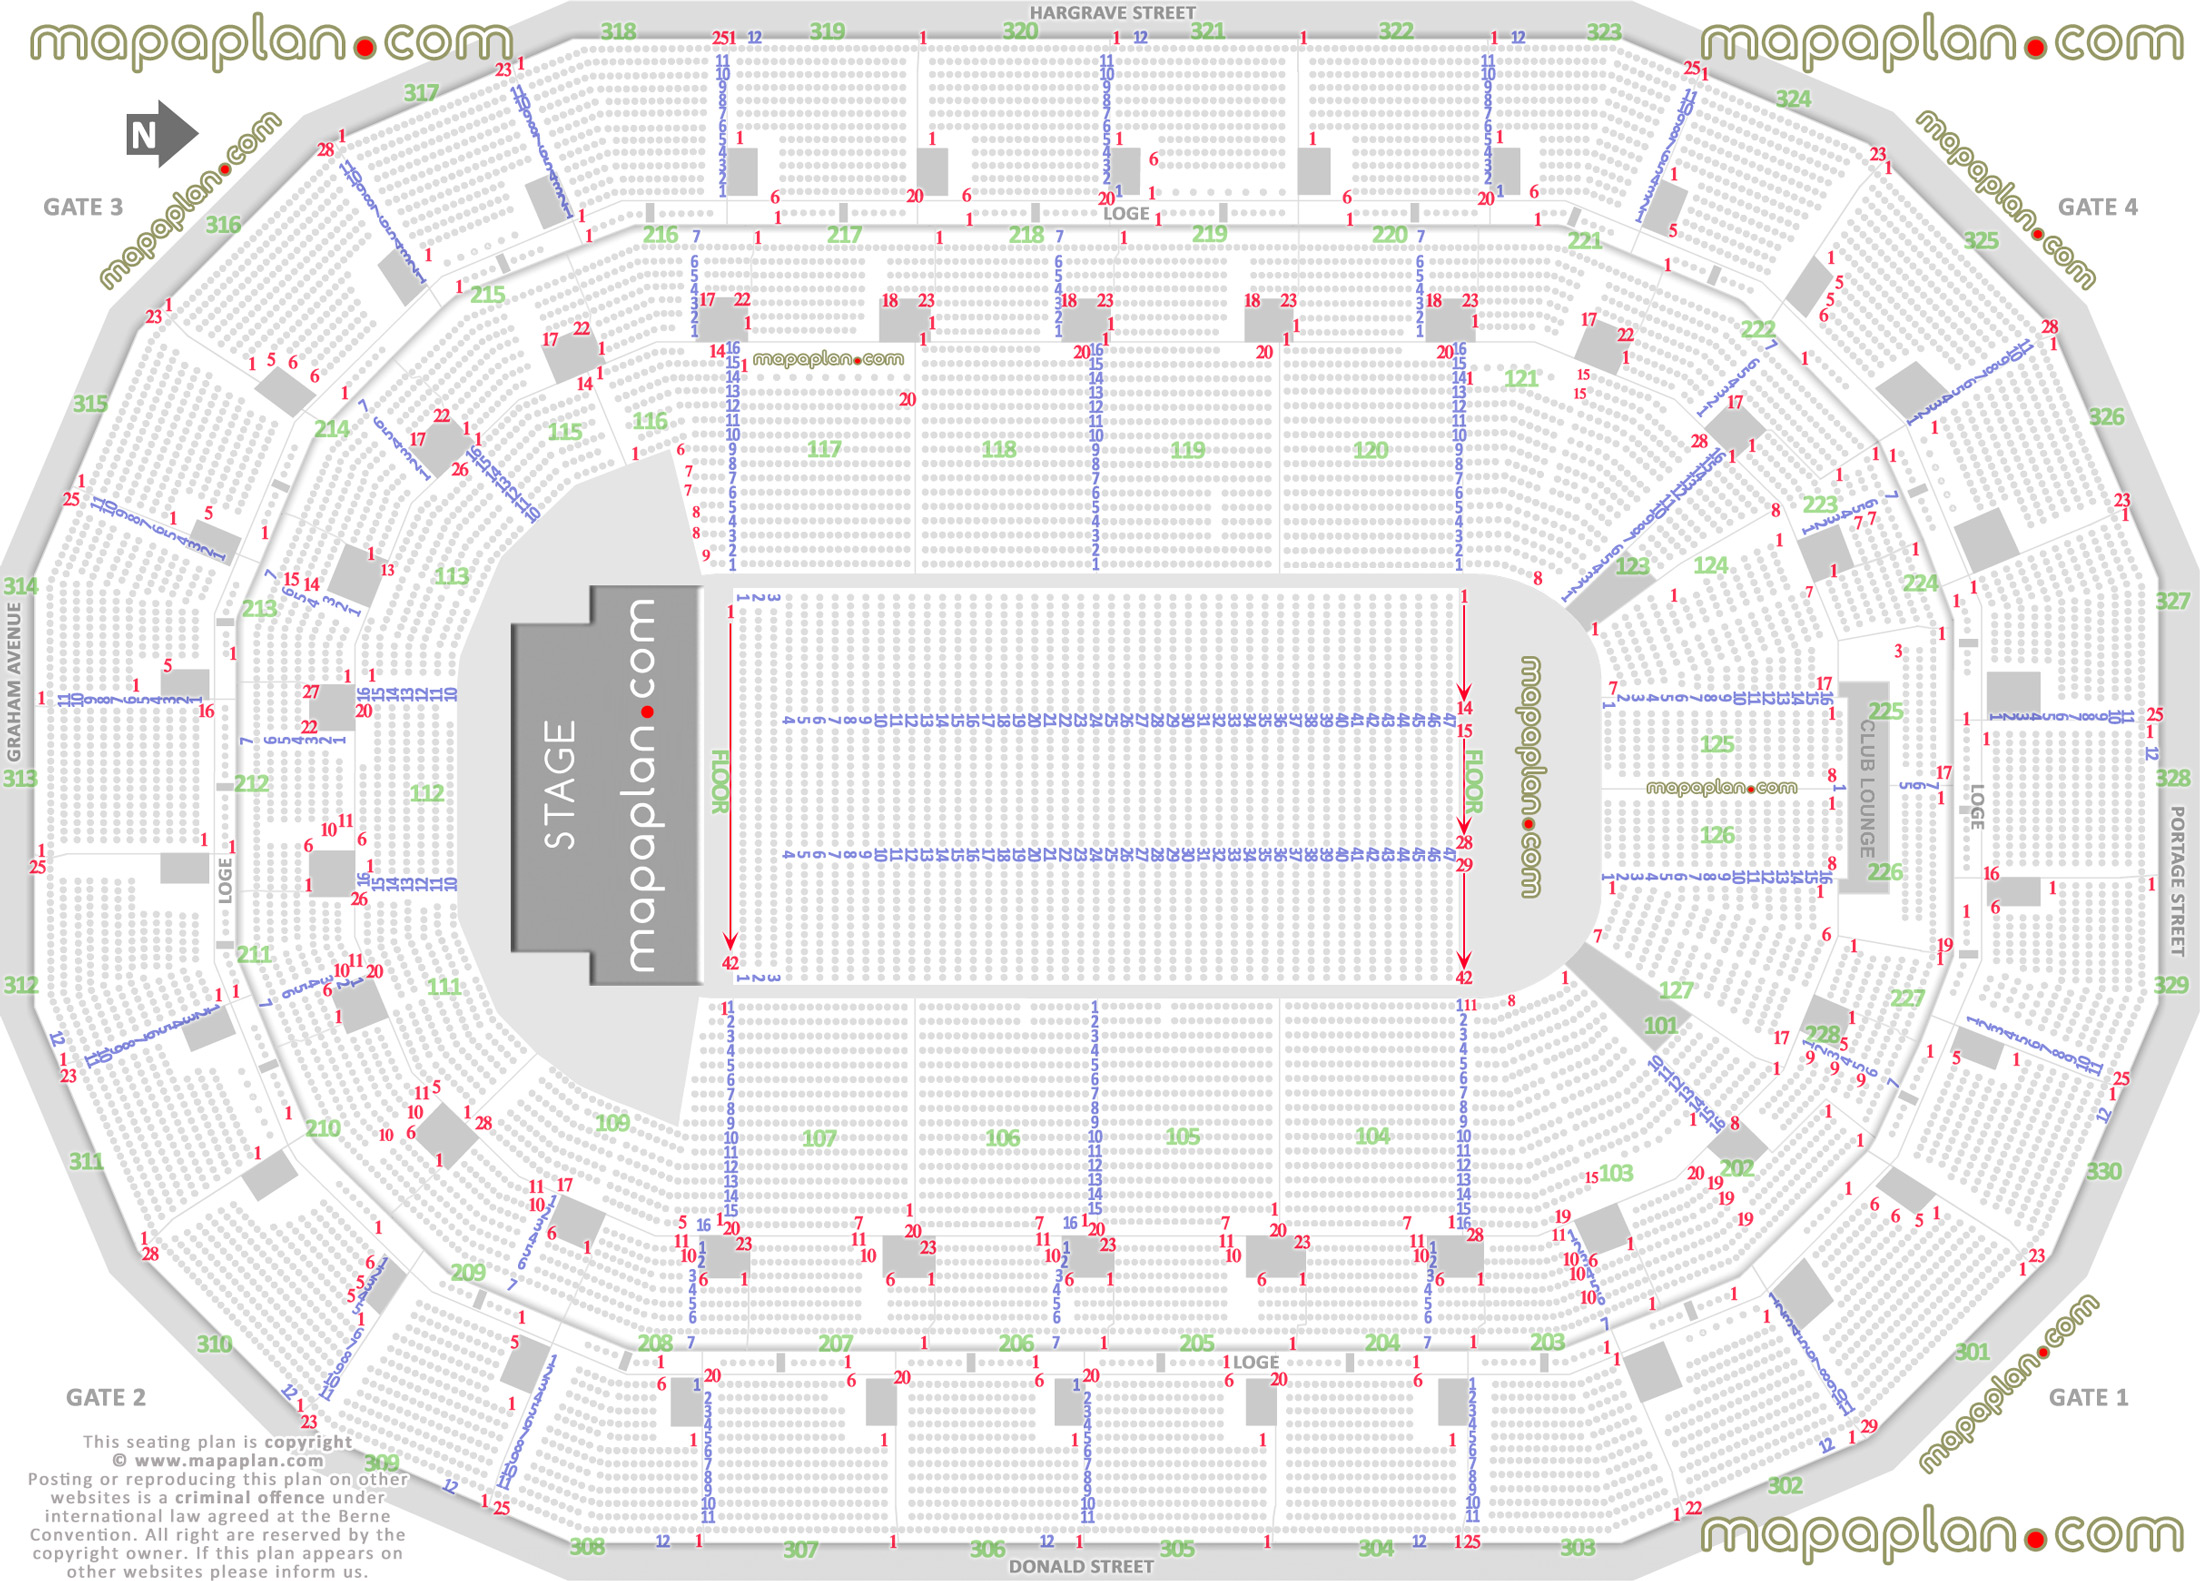 detailed seat row numbers end stage concert sections floor plan map arena lower upper level layout Winnipeg Canada Life Centre seating chart